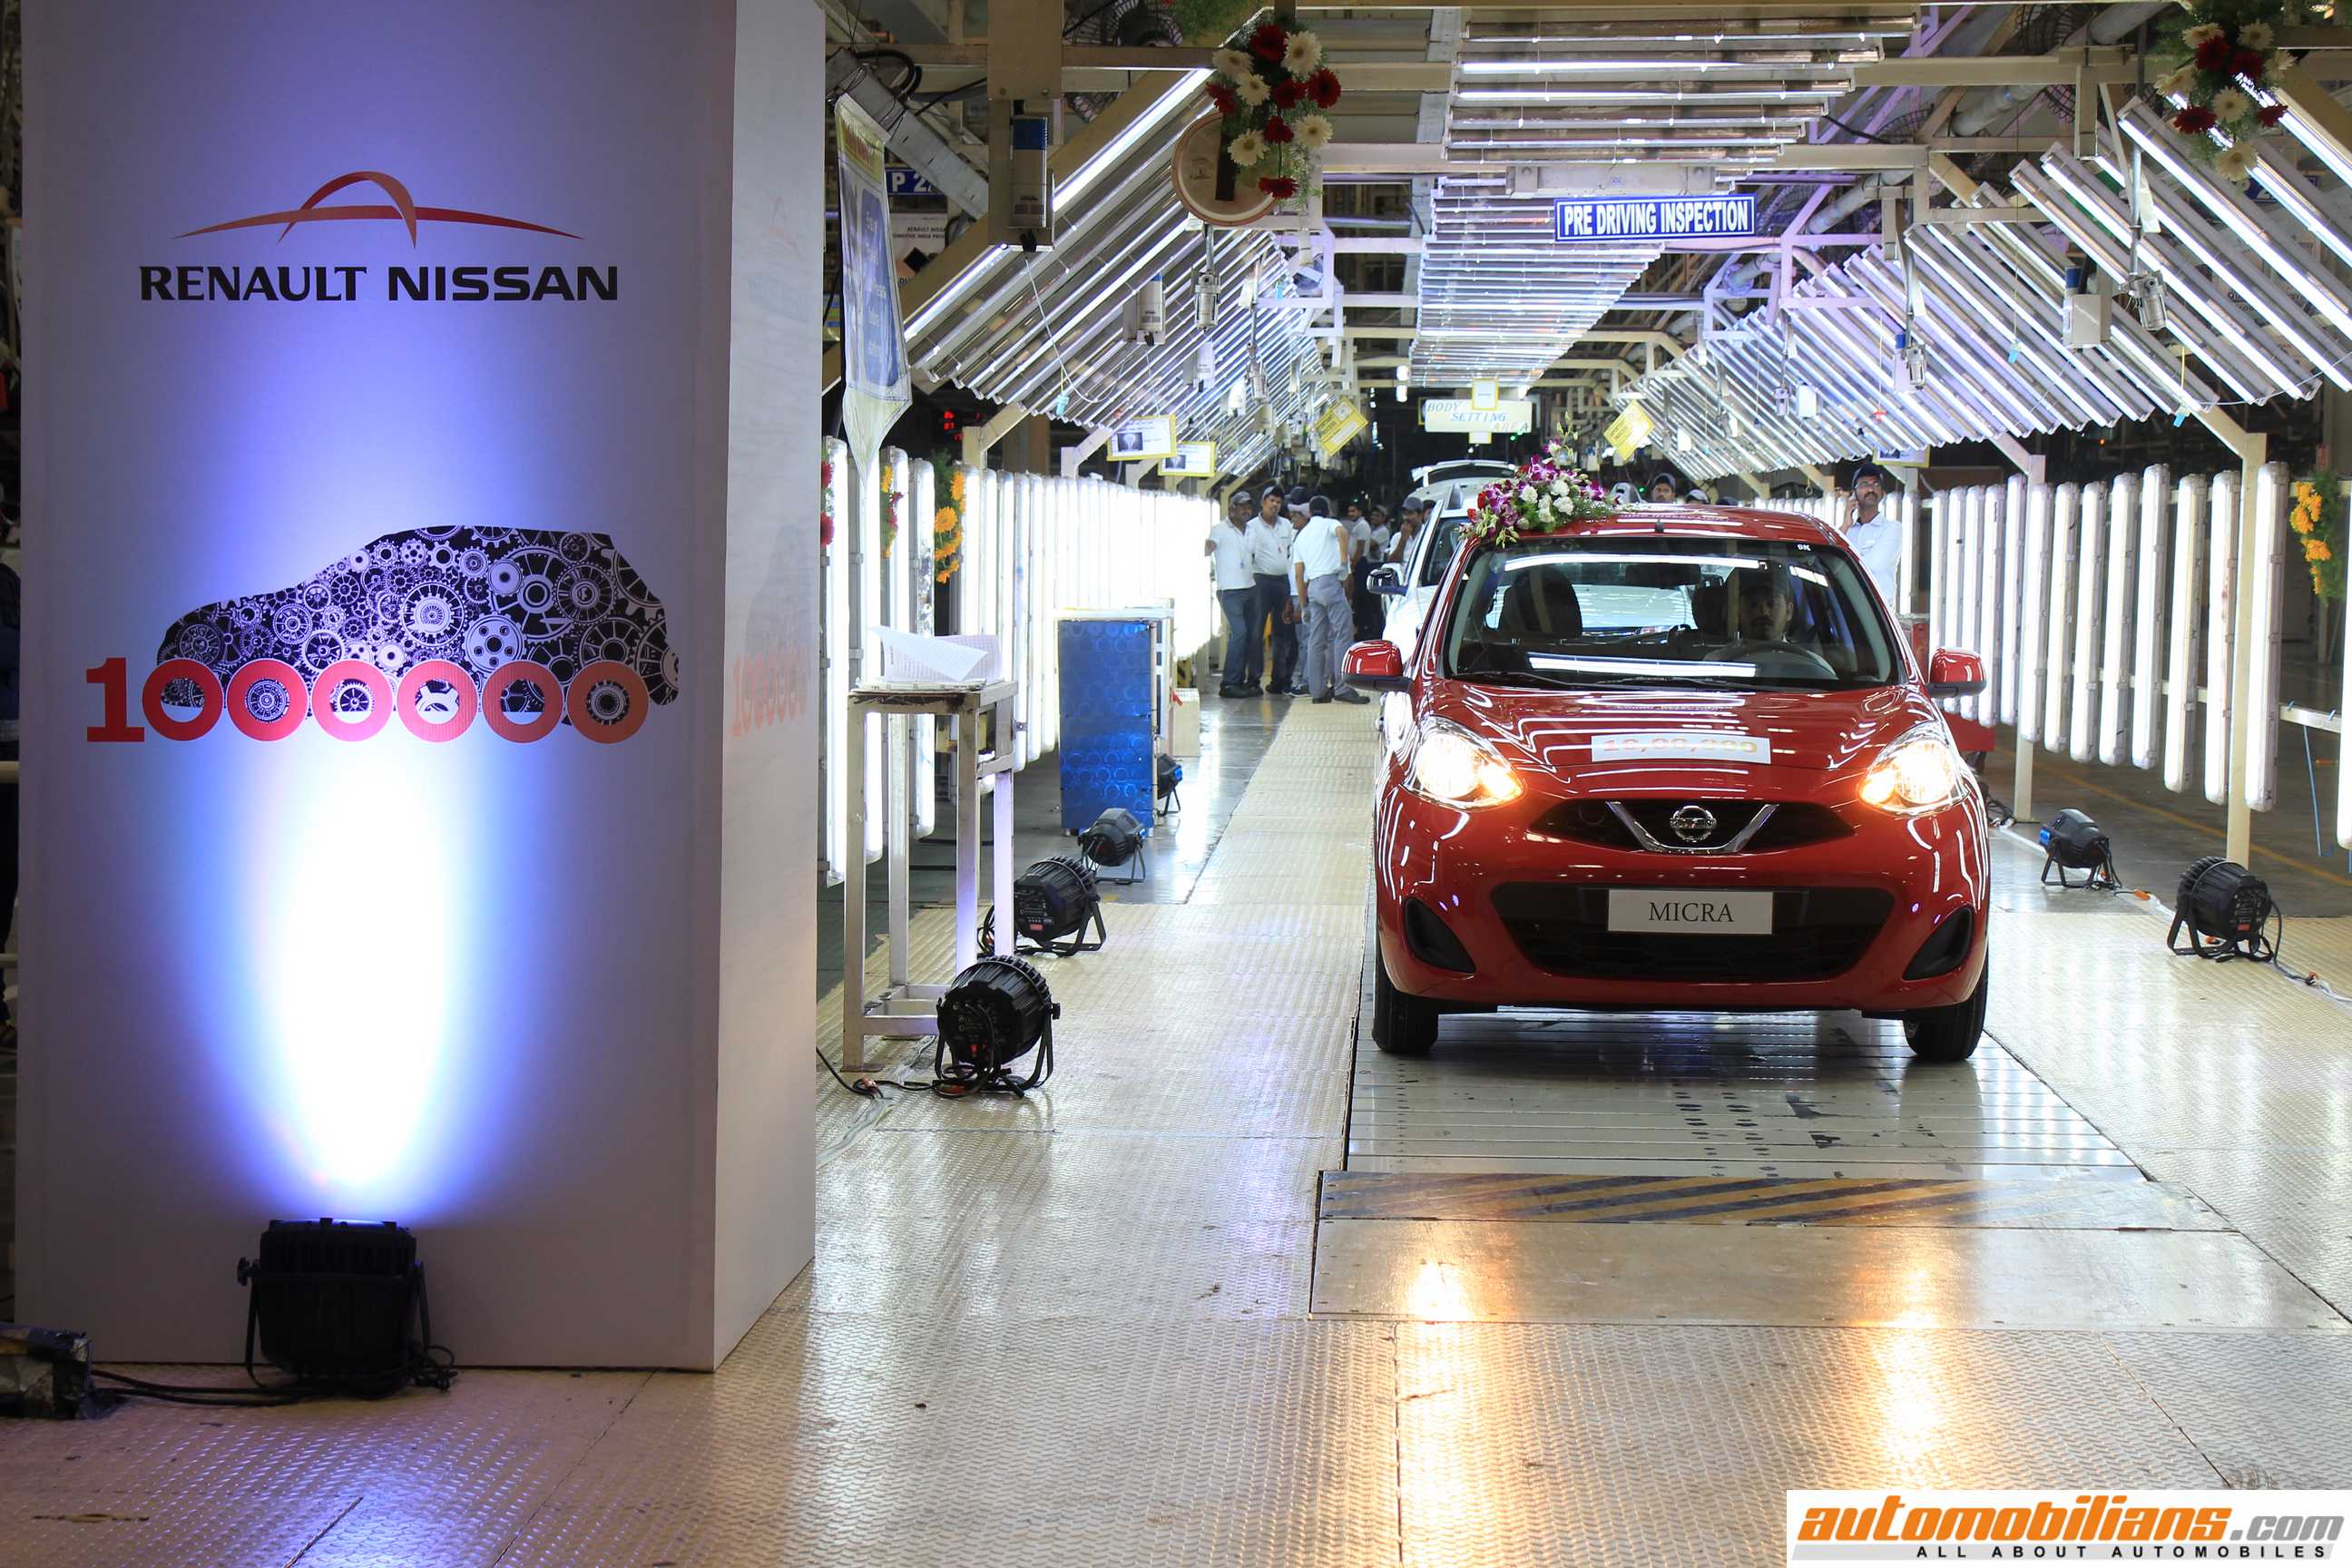 One Millionth Car Rolls Off The Renault-Nissan Automotive Plant In Chennai